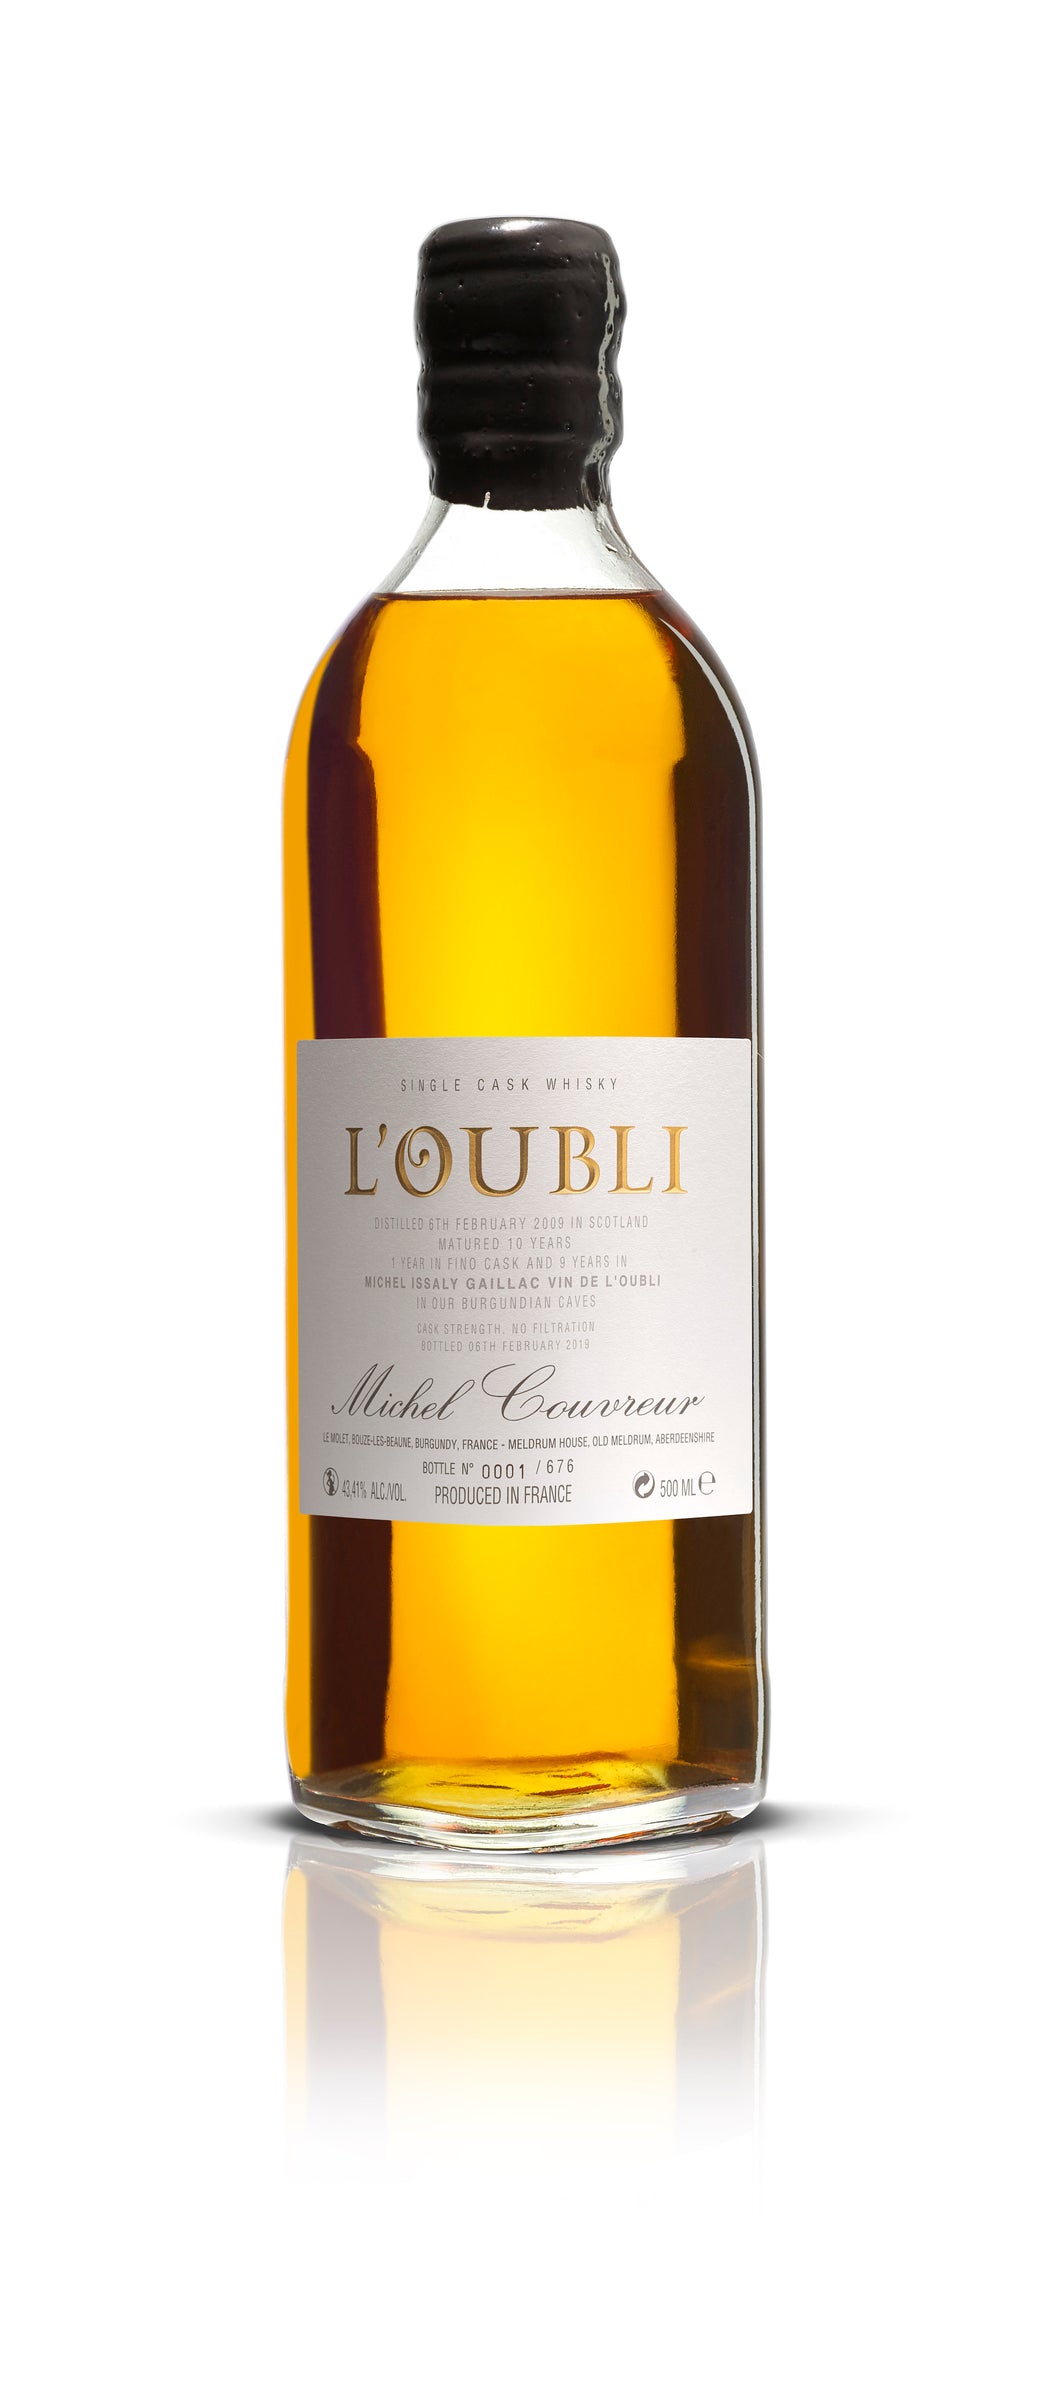 Michel Couvreur - Limited Edition - Oubli Maturation